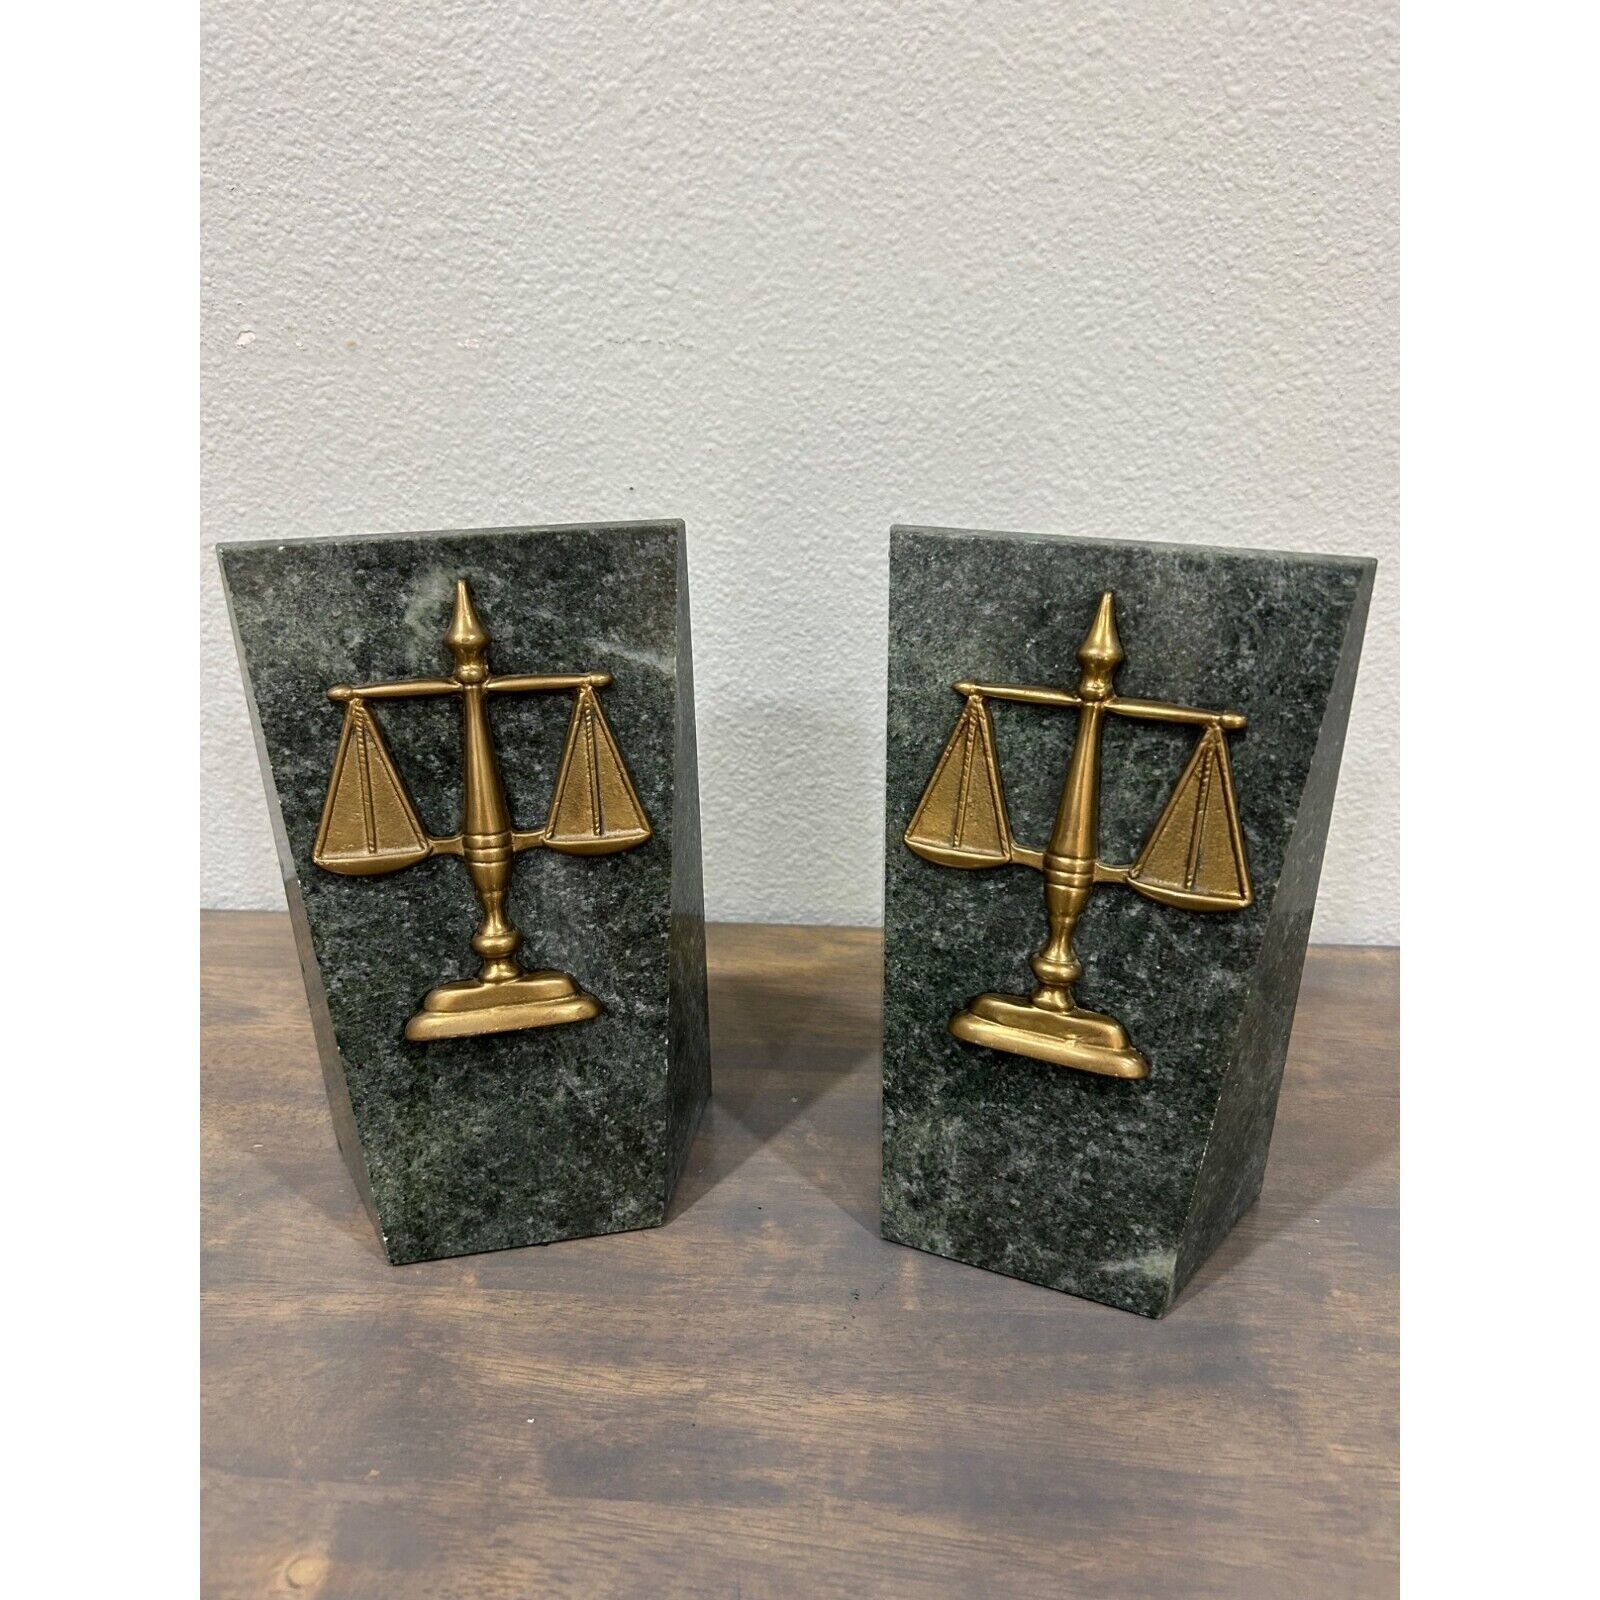 Scales of Justice Green Marble Bookends Brass Scales Legal Lawyers Judicial